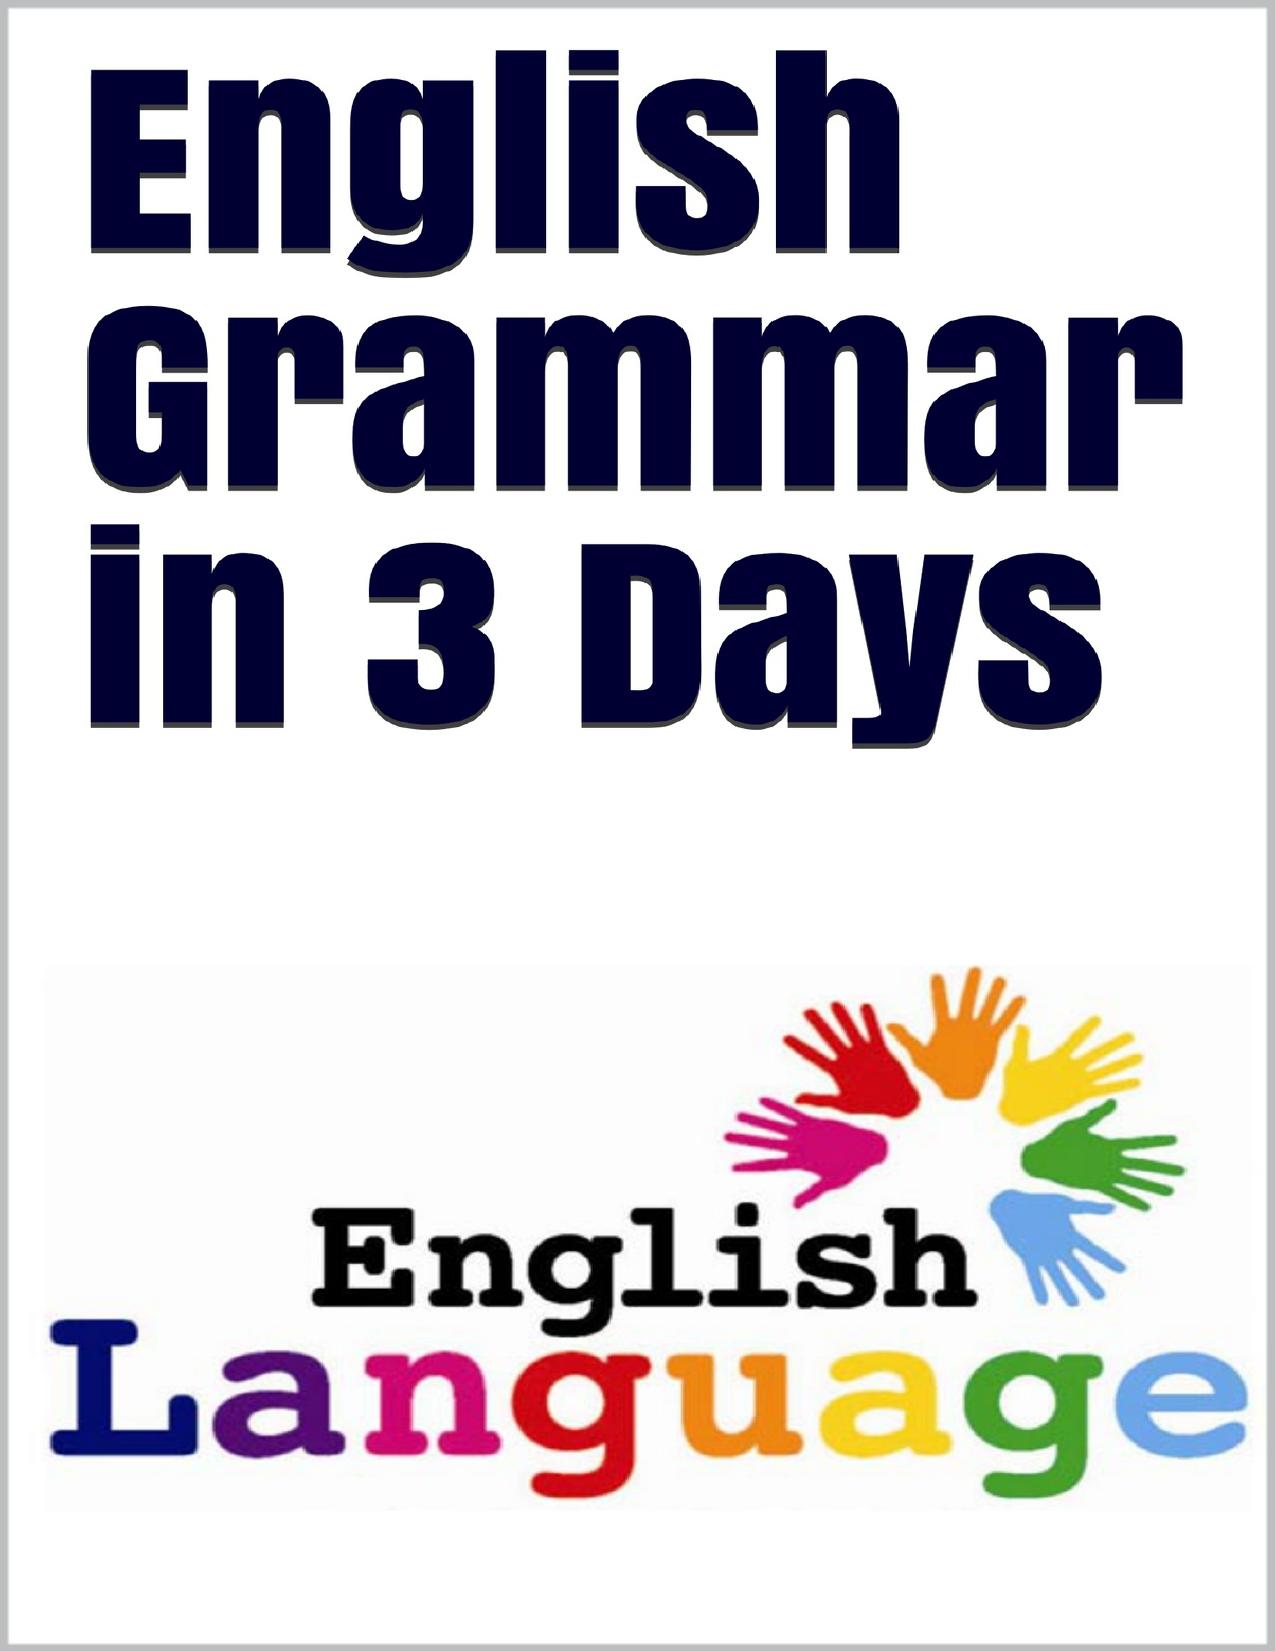 English Grammar in 3 days: Learners of English by OULGHRINI AYOUB